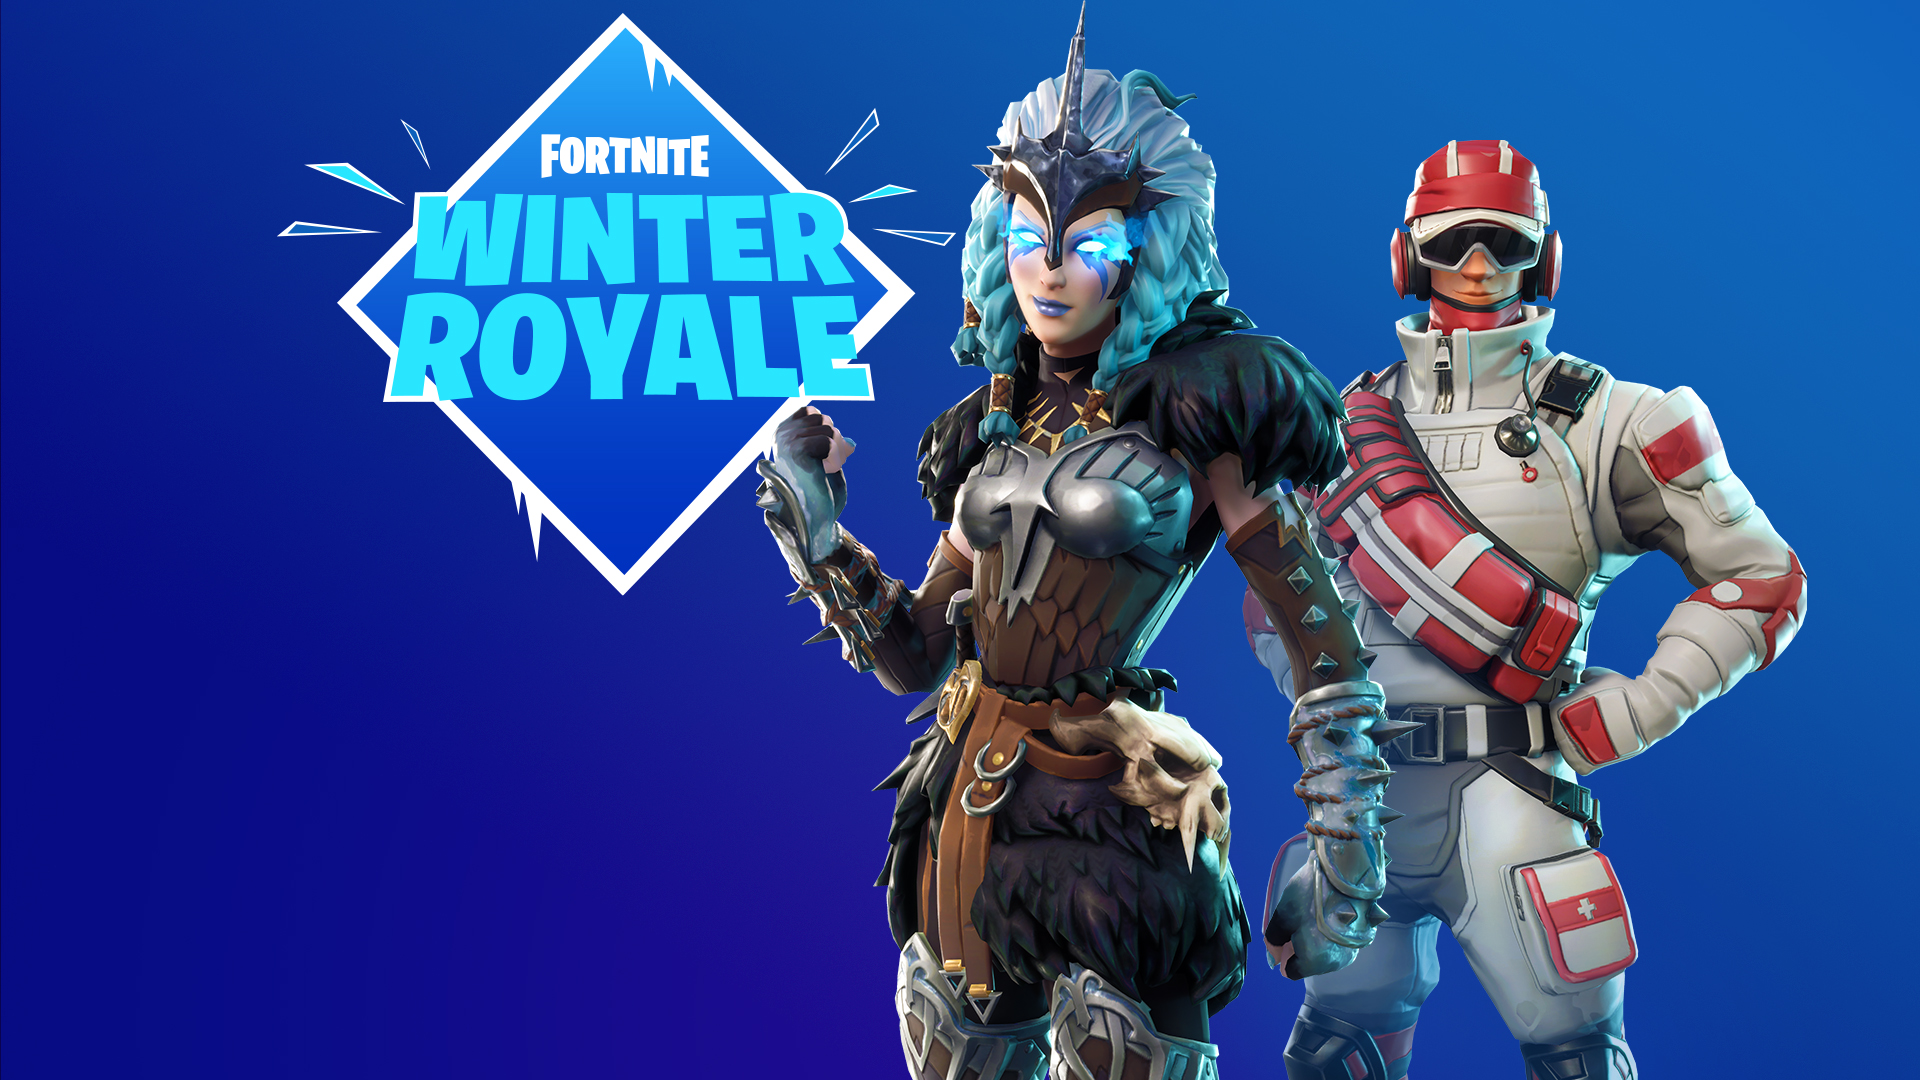 psalm and neace wreaked havoc with the infinity blade in the fortnite winter royale na semifinals - na na fortnite